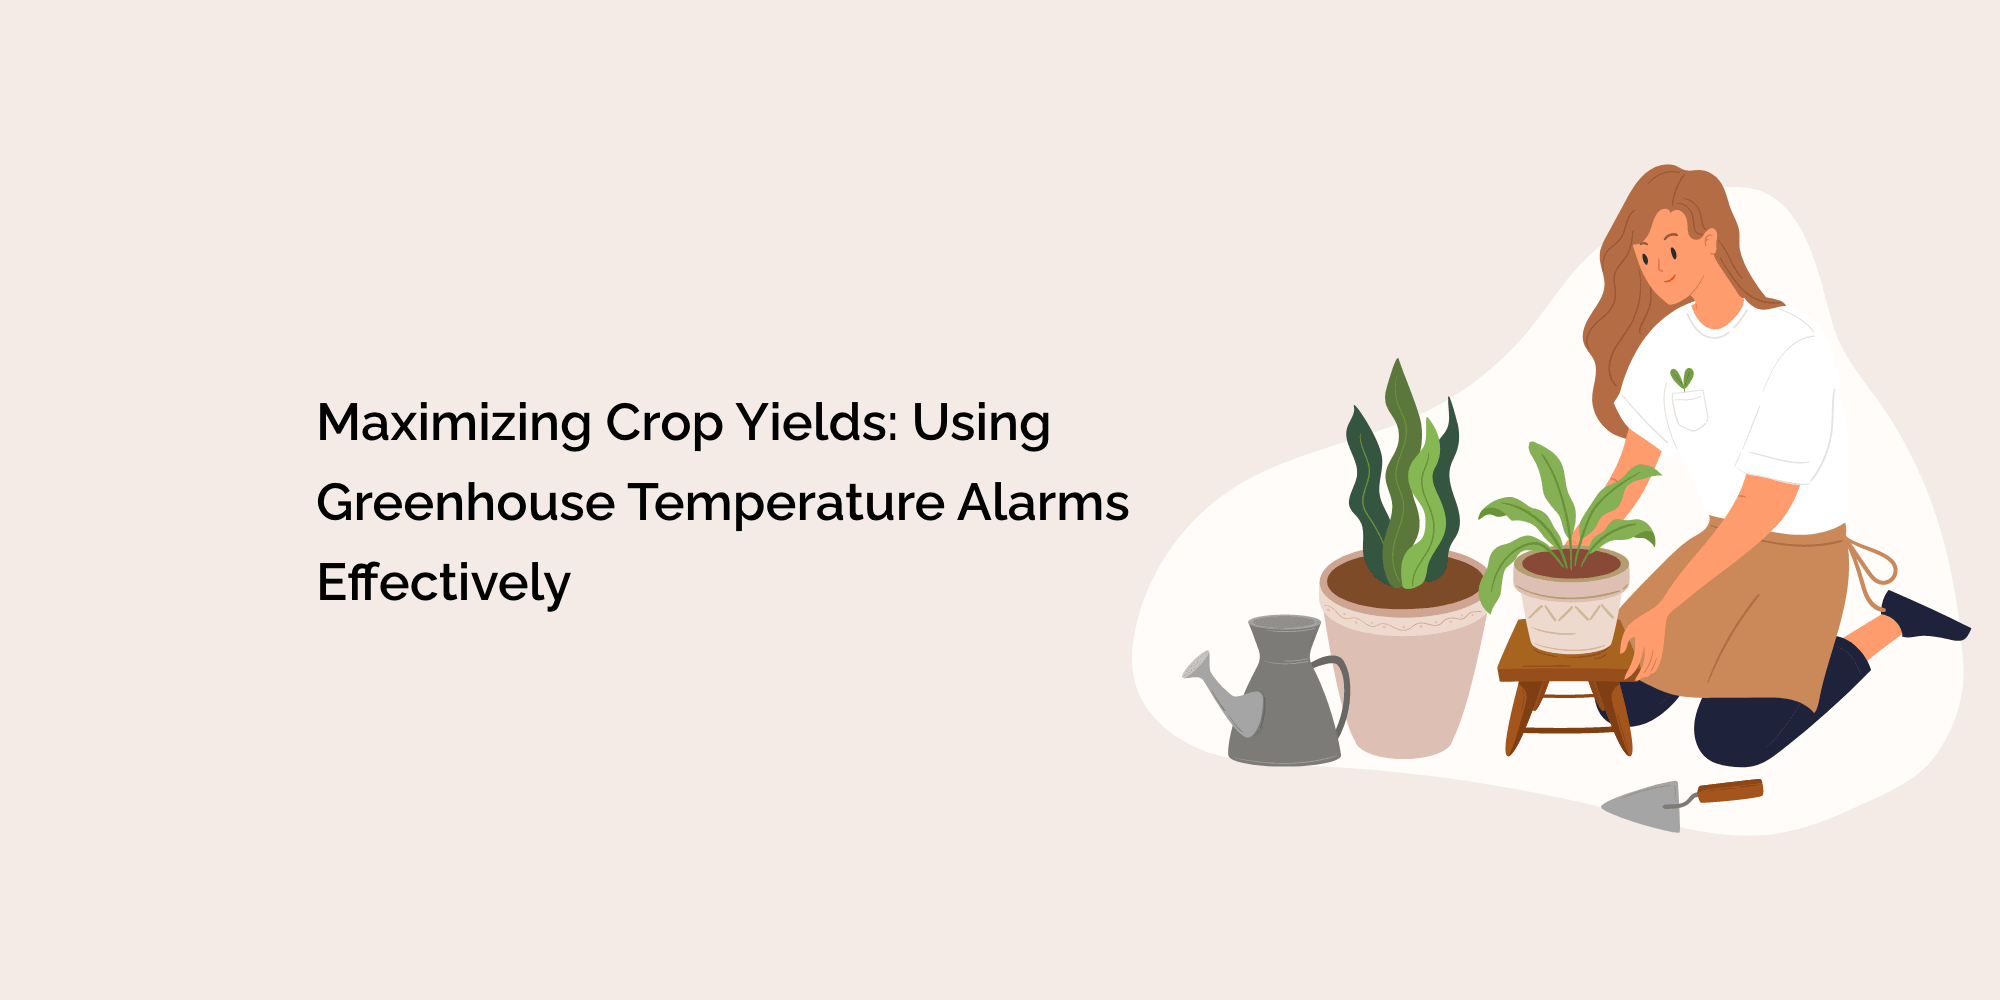 Maximizing Crop Yields: Using Greenhouse Temperature Alarms Effectively